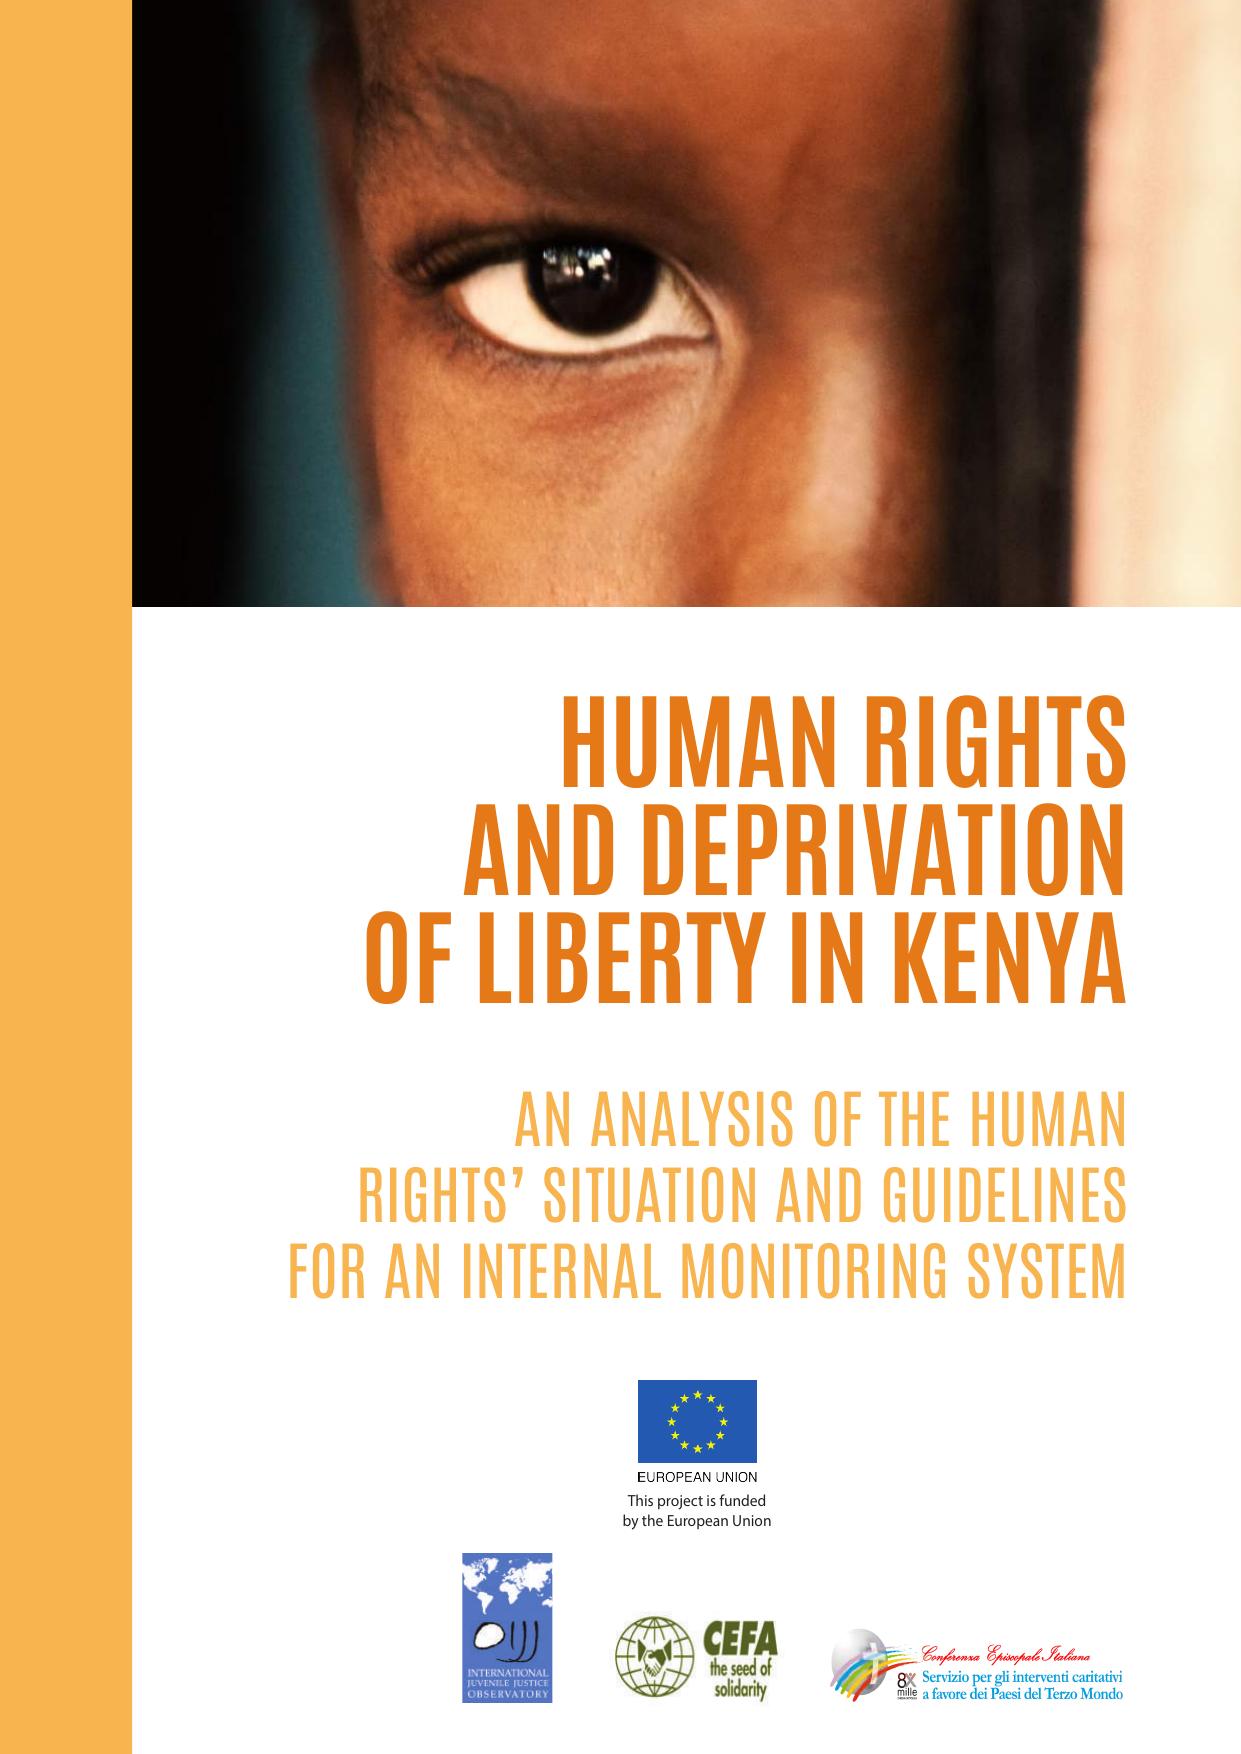 Human Rights and Deprivation of Liberty in Kenya 2017